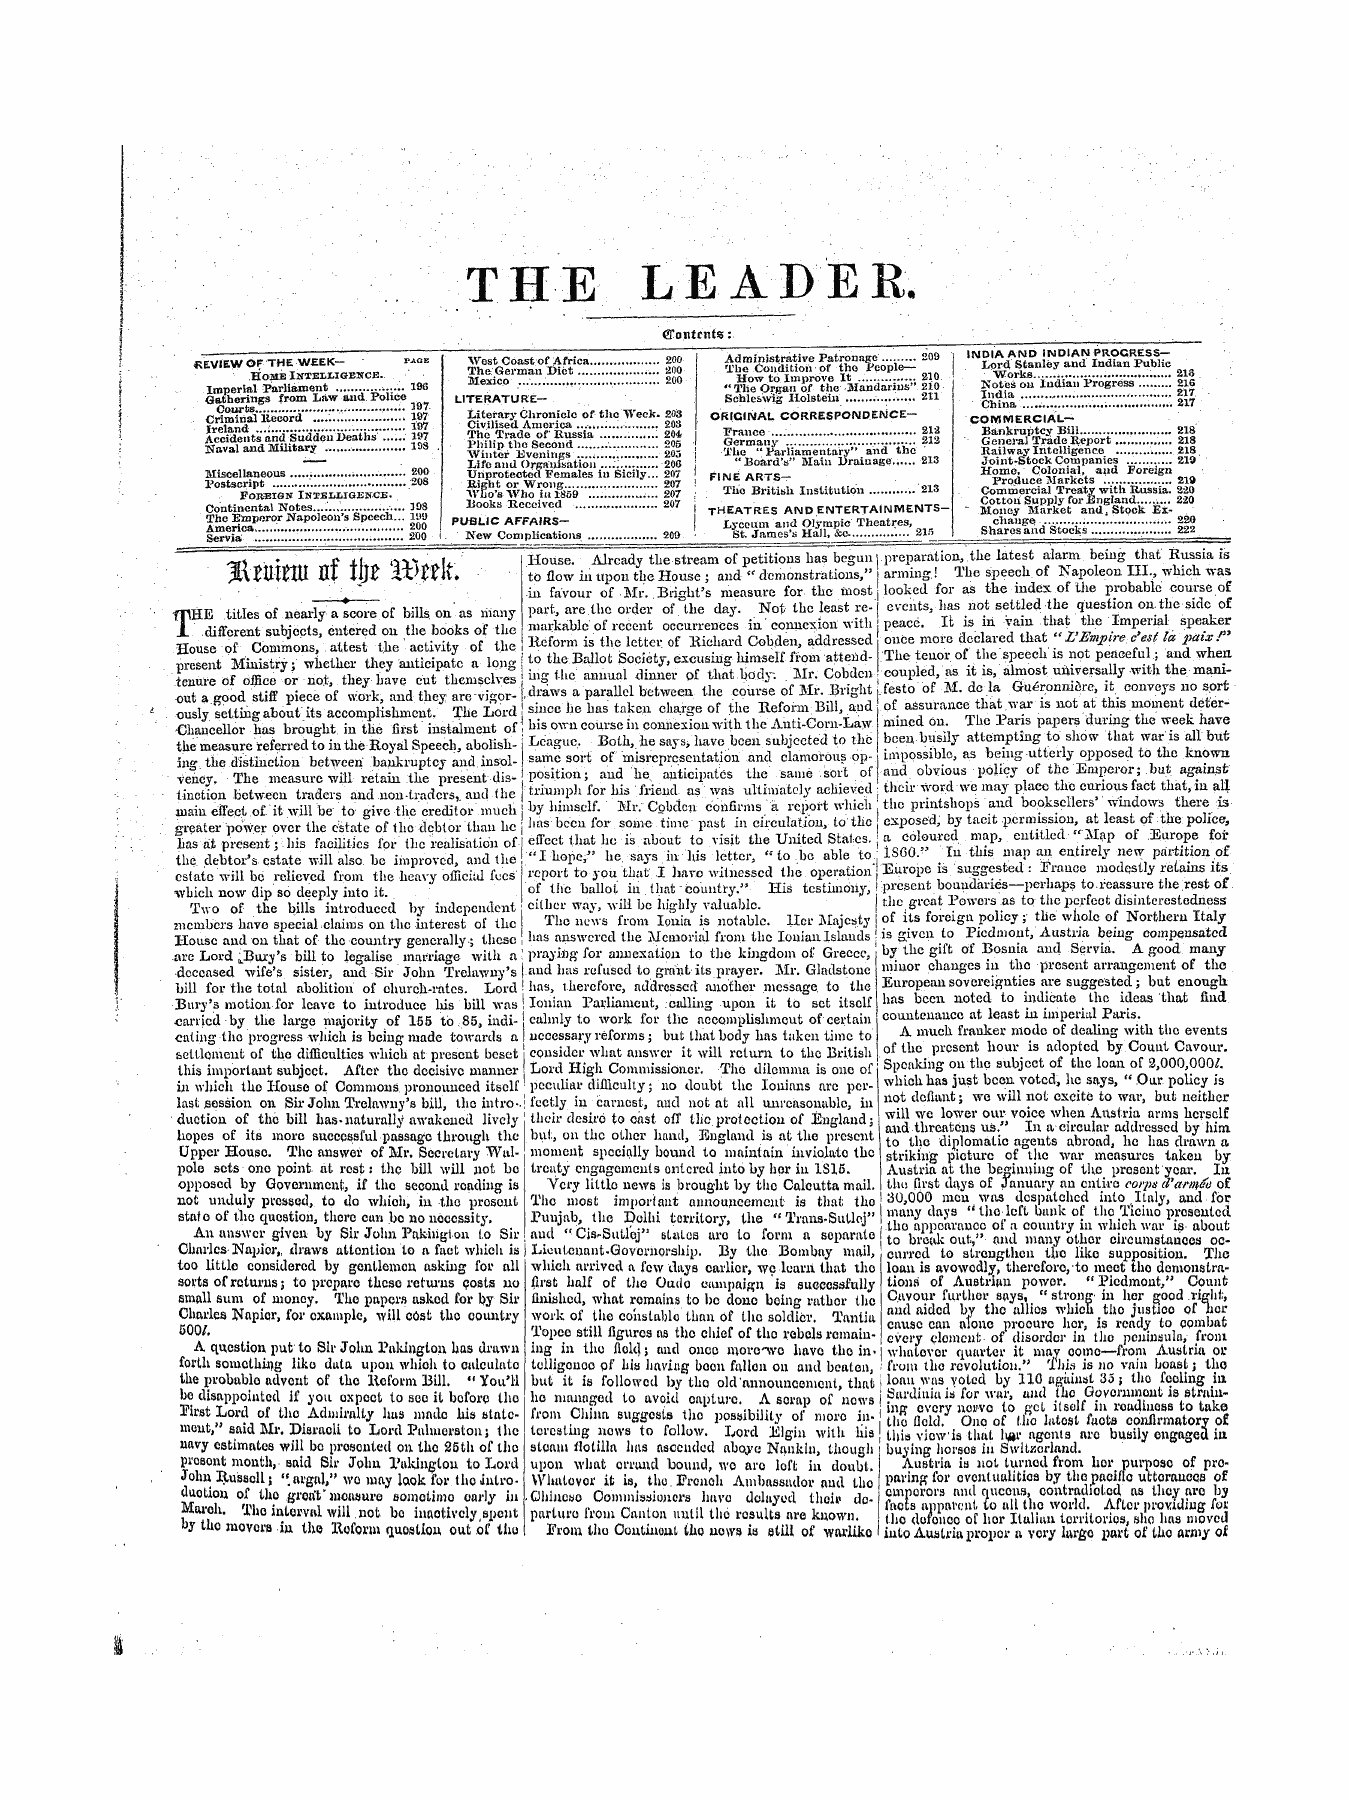 Leader (1850-1860): jS F Y, 1st edition - Ctaiitcnfss: